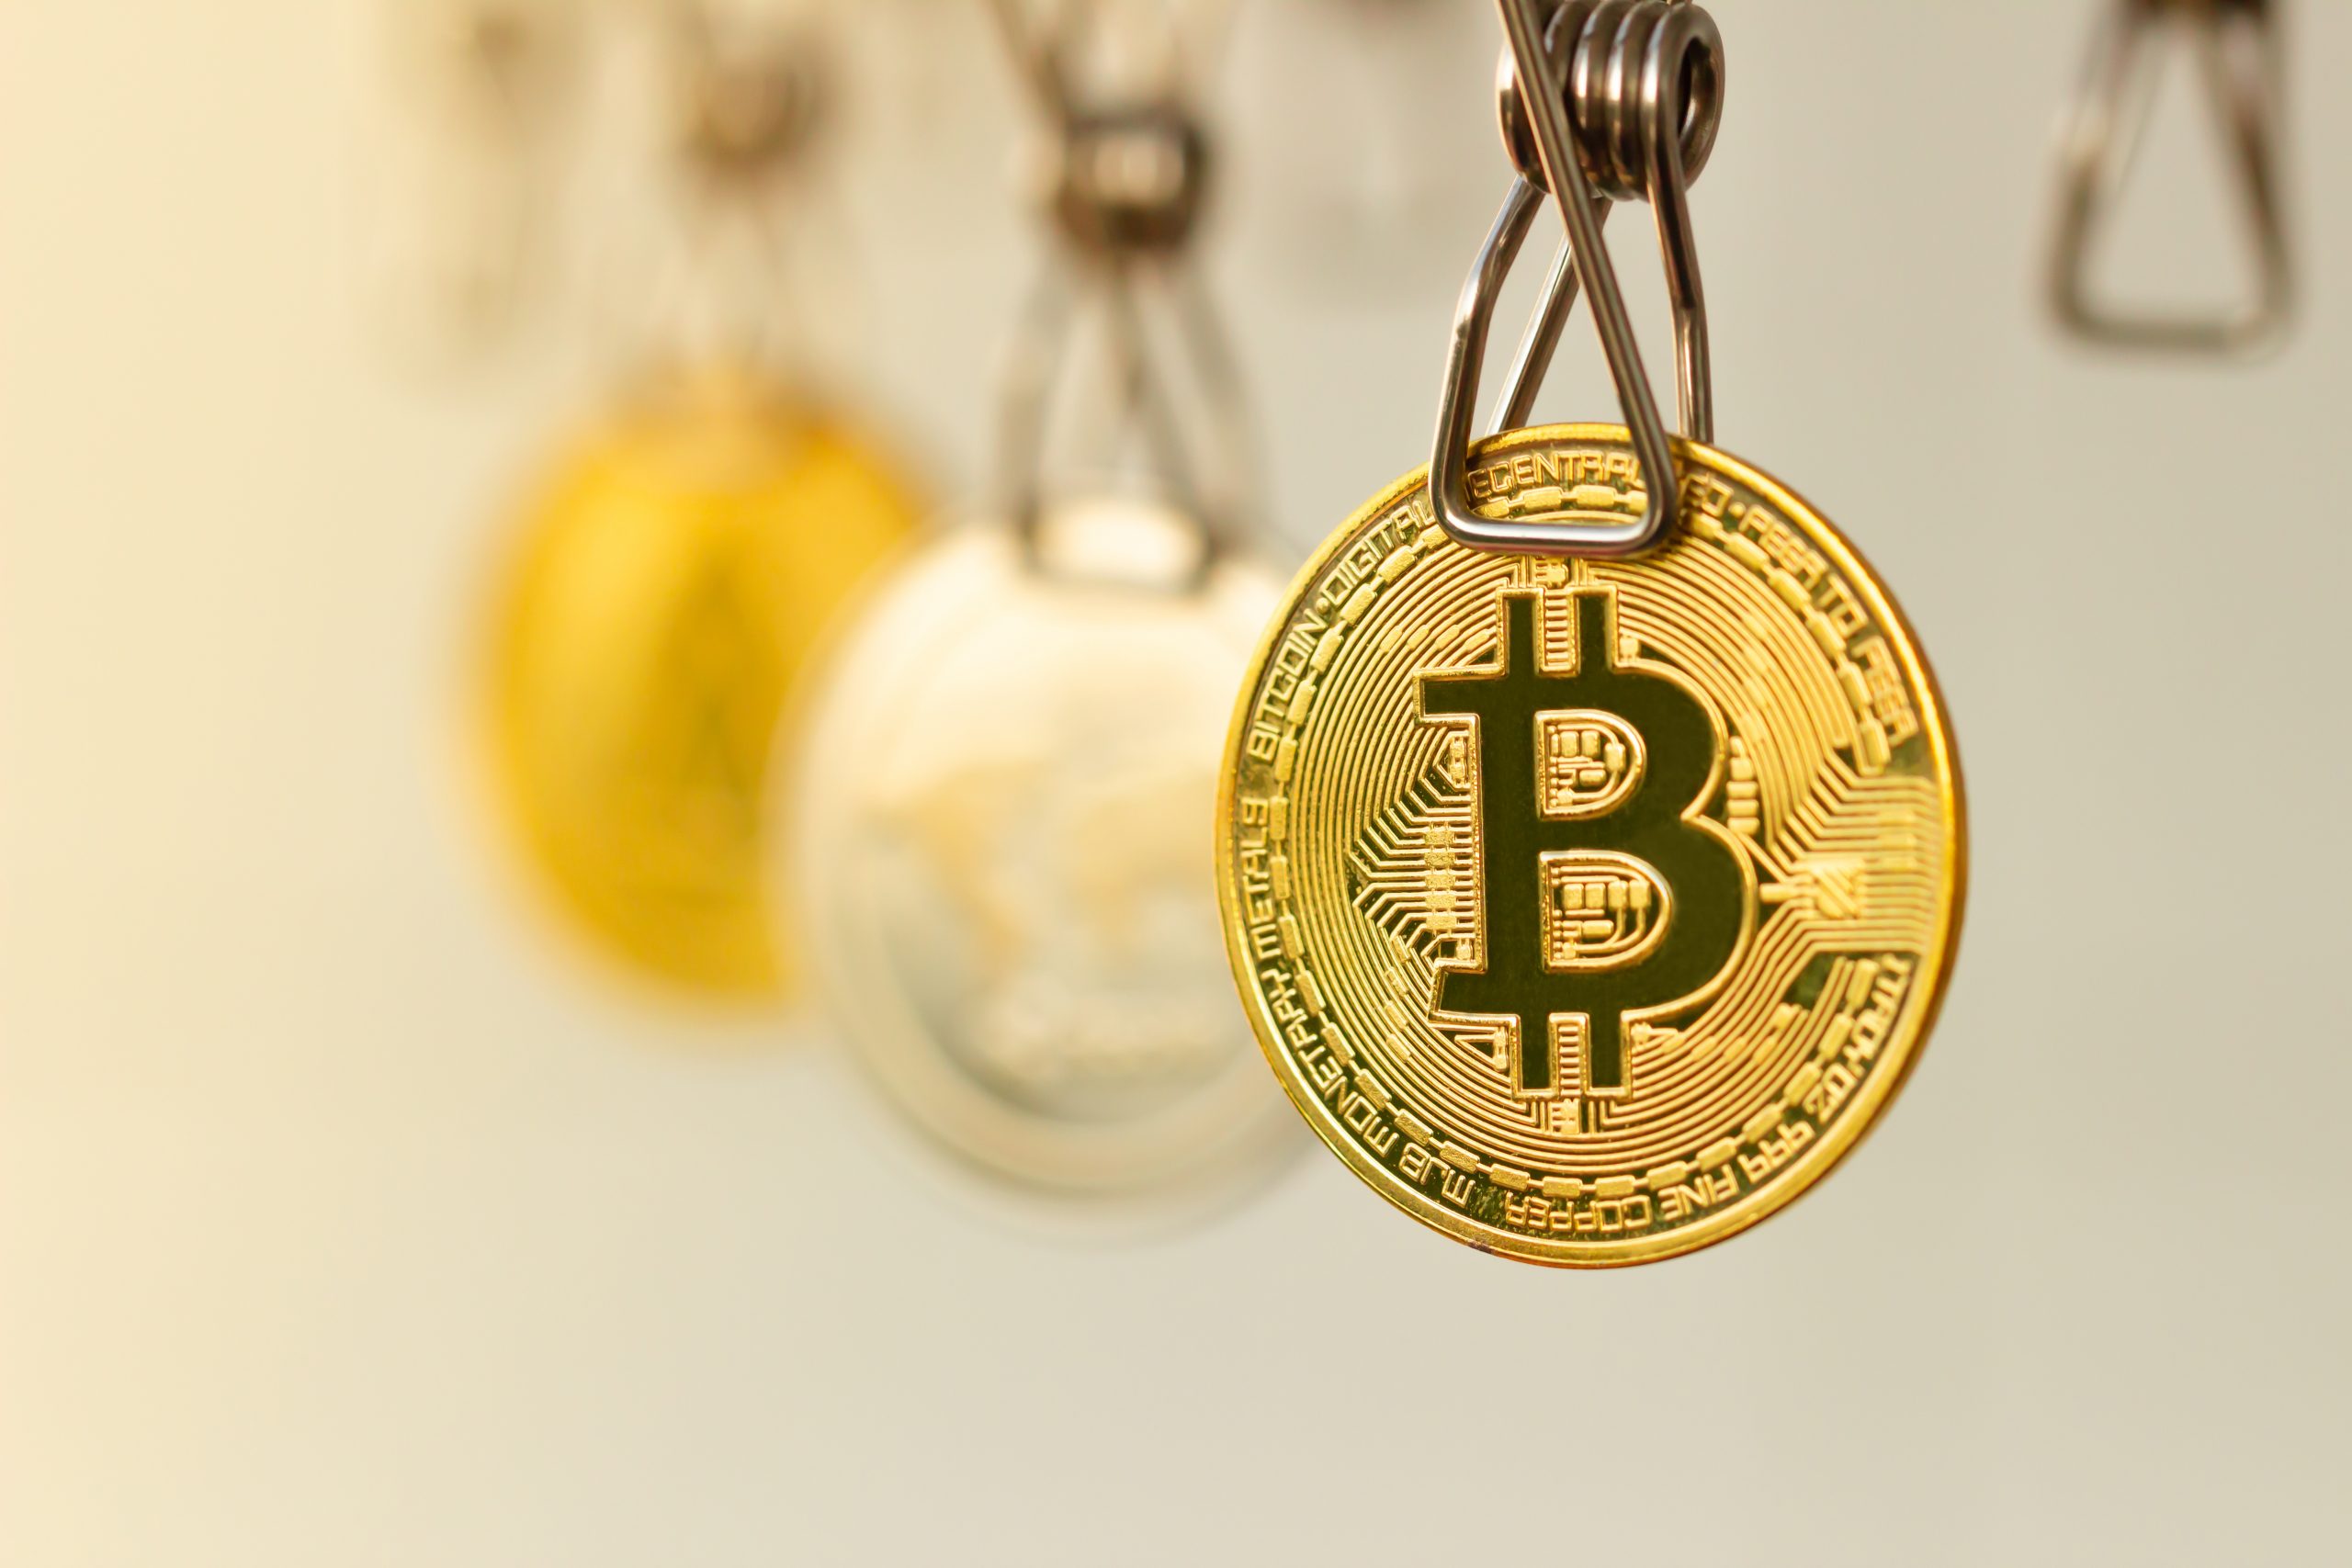 Latest on Bitcoin News - no longer for criminals?